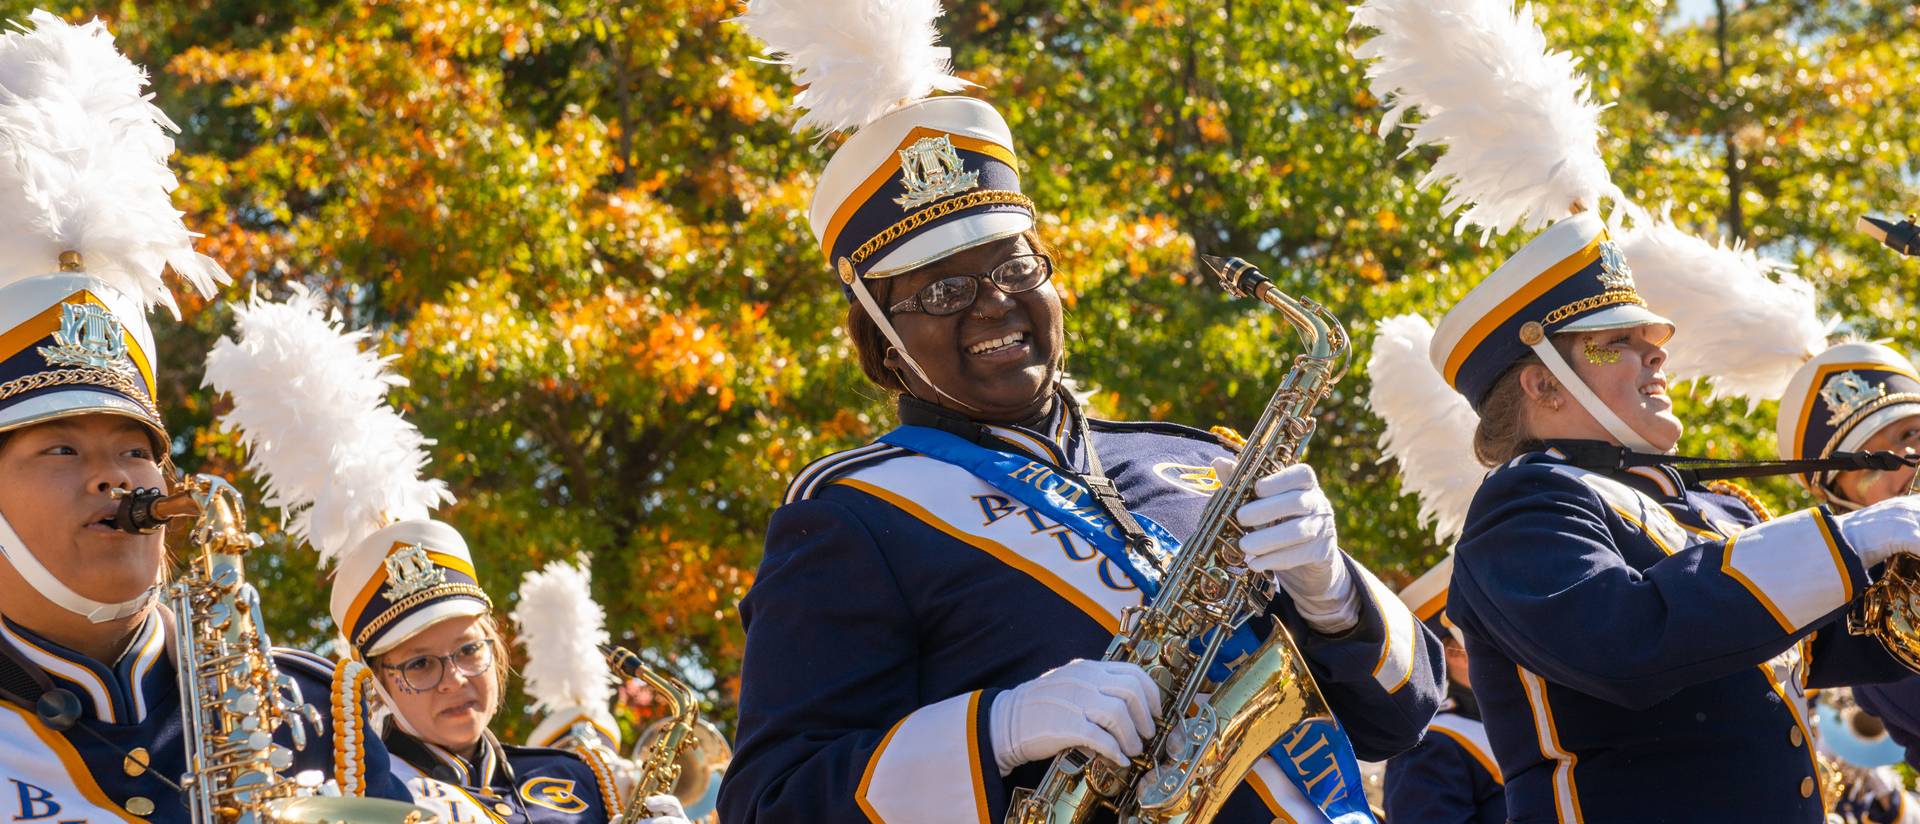 UWEC football fans tailgate and watch a performance by the BMB, Blugold Marching Band, prior to the Homecoming football game at Carson Park.